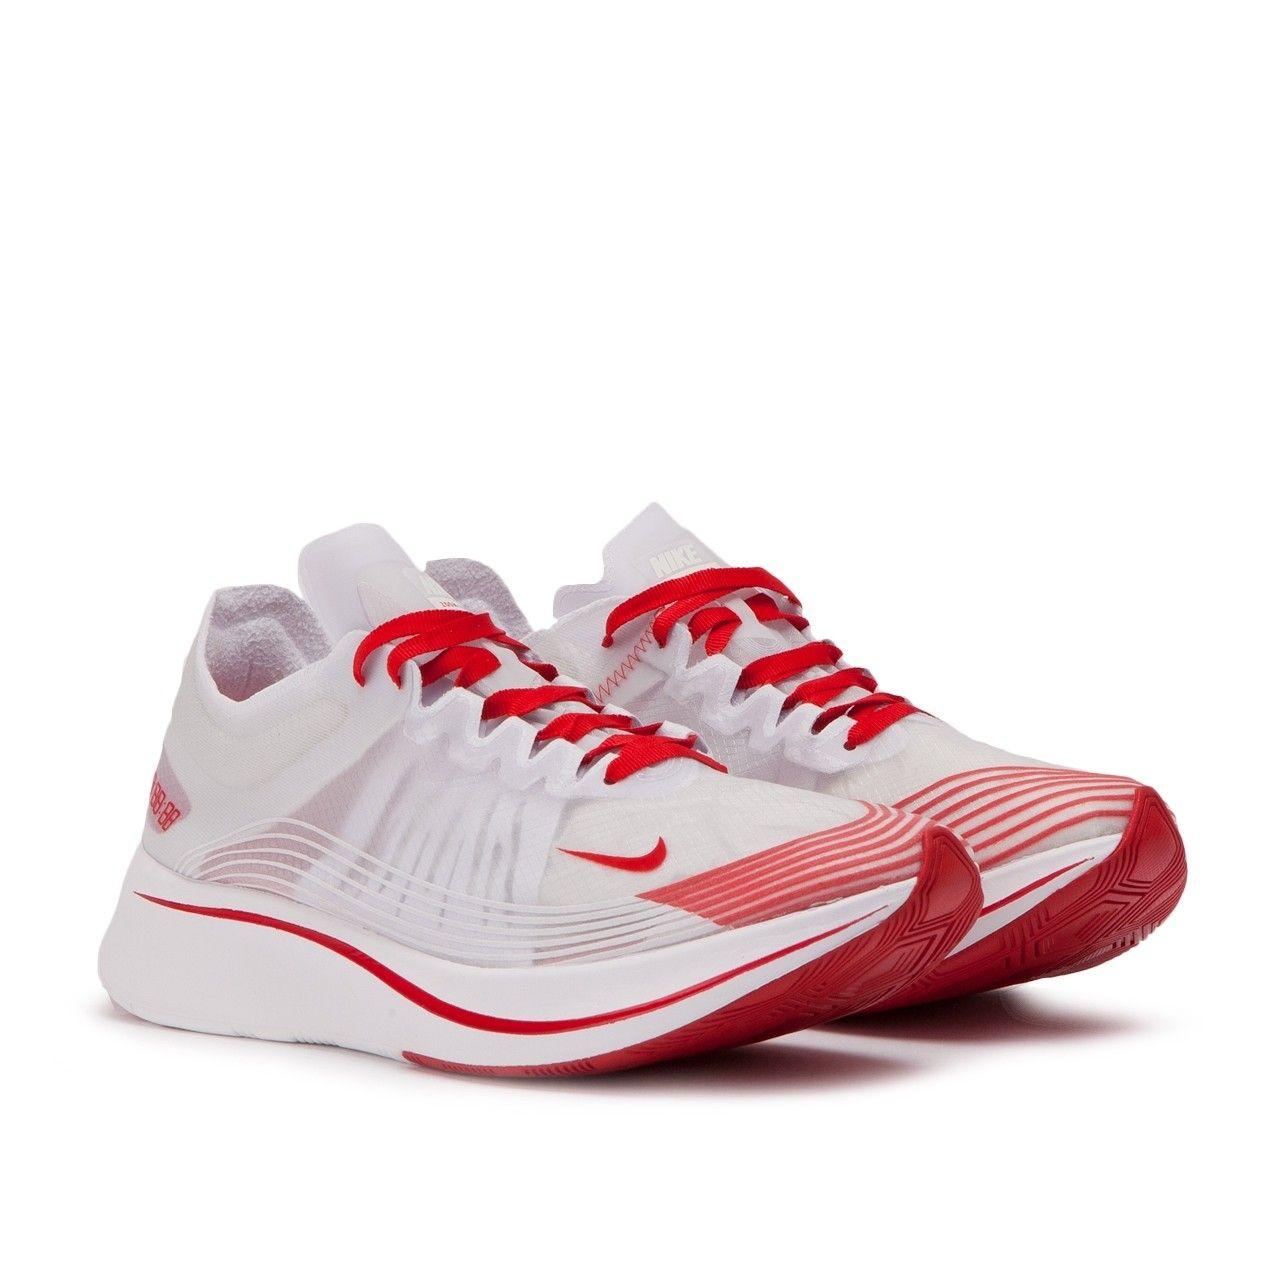 White with Red Sp Logo - Nike Zoom Fly SP (White / Red) AJ9282-100